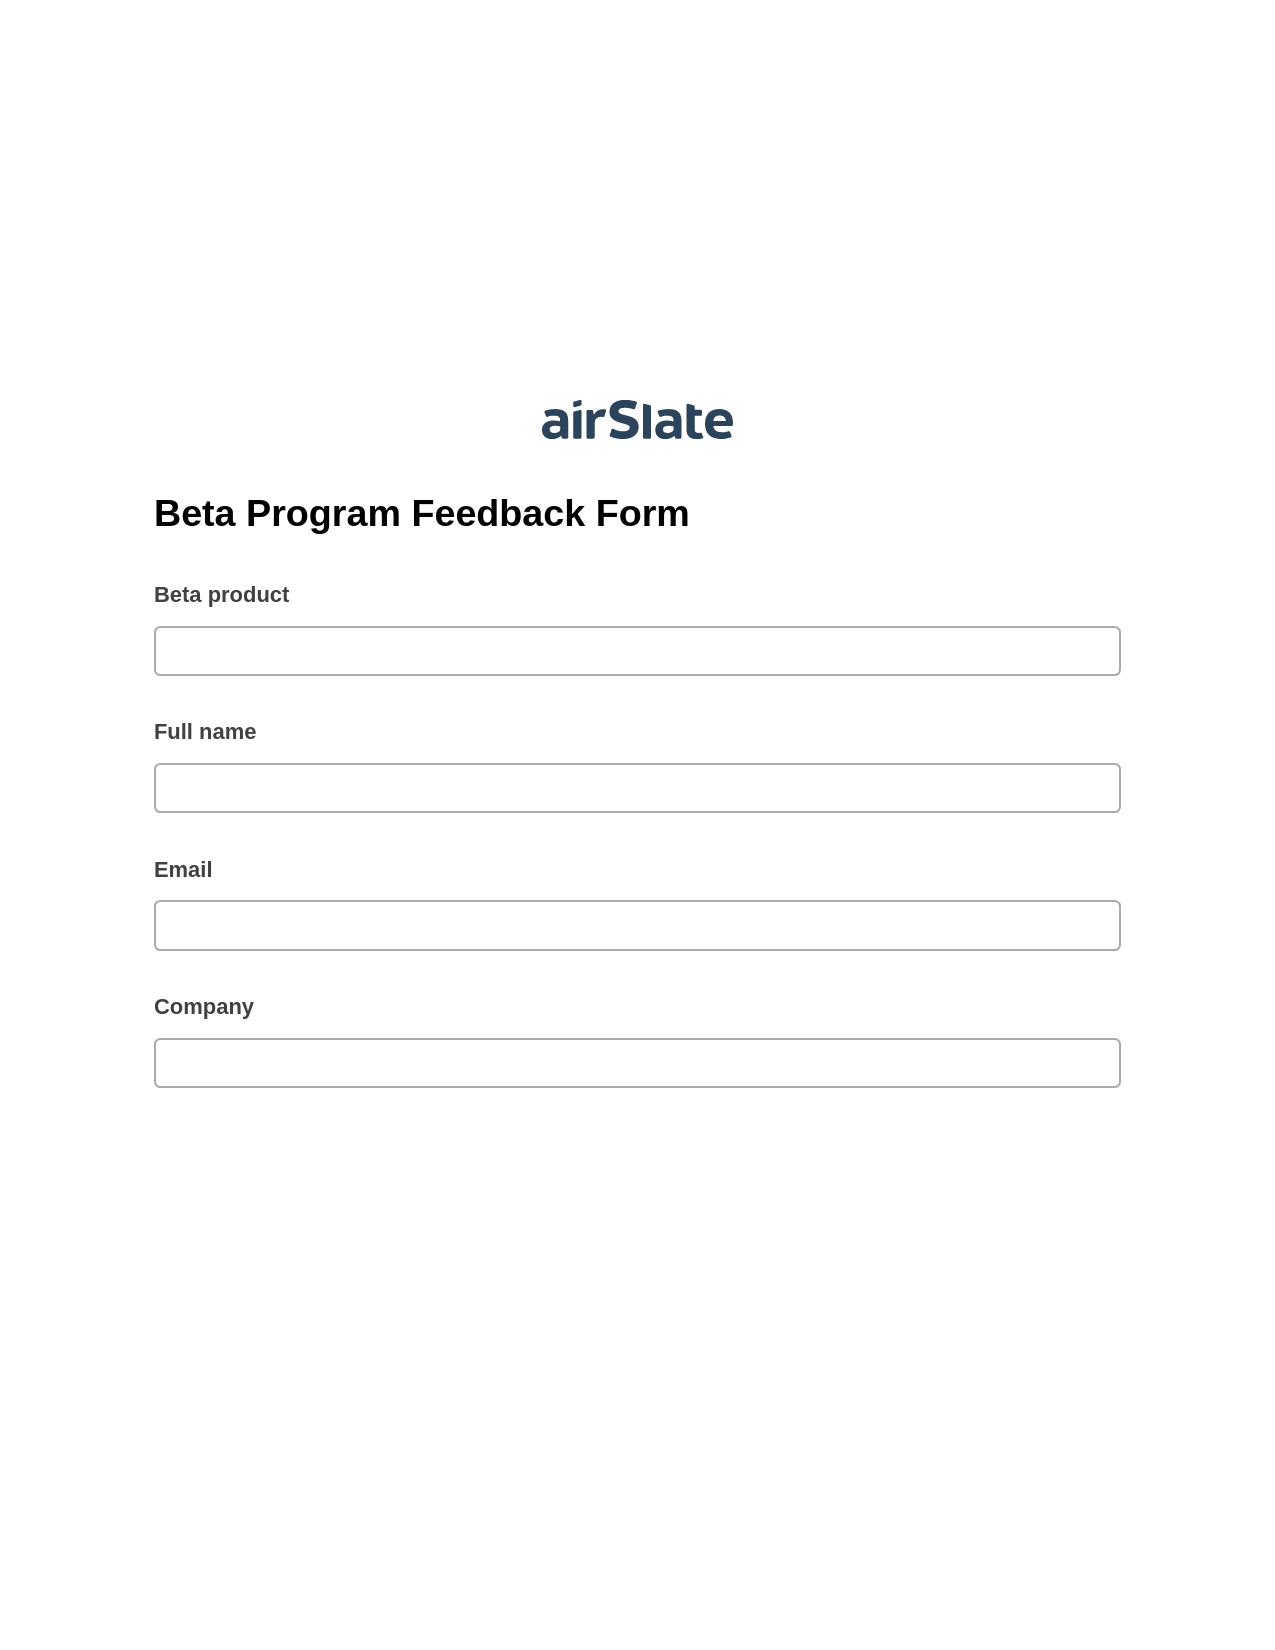 Beta Program Feedback Form Pre-fill Document Bot, Create slate from another Flow Bot, Box Bot